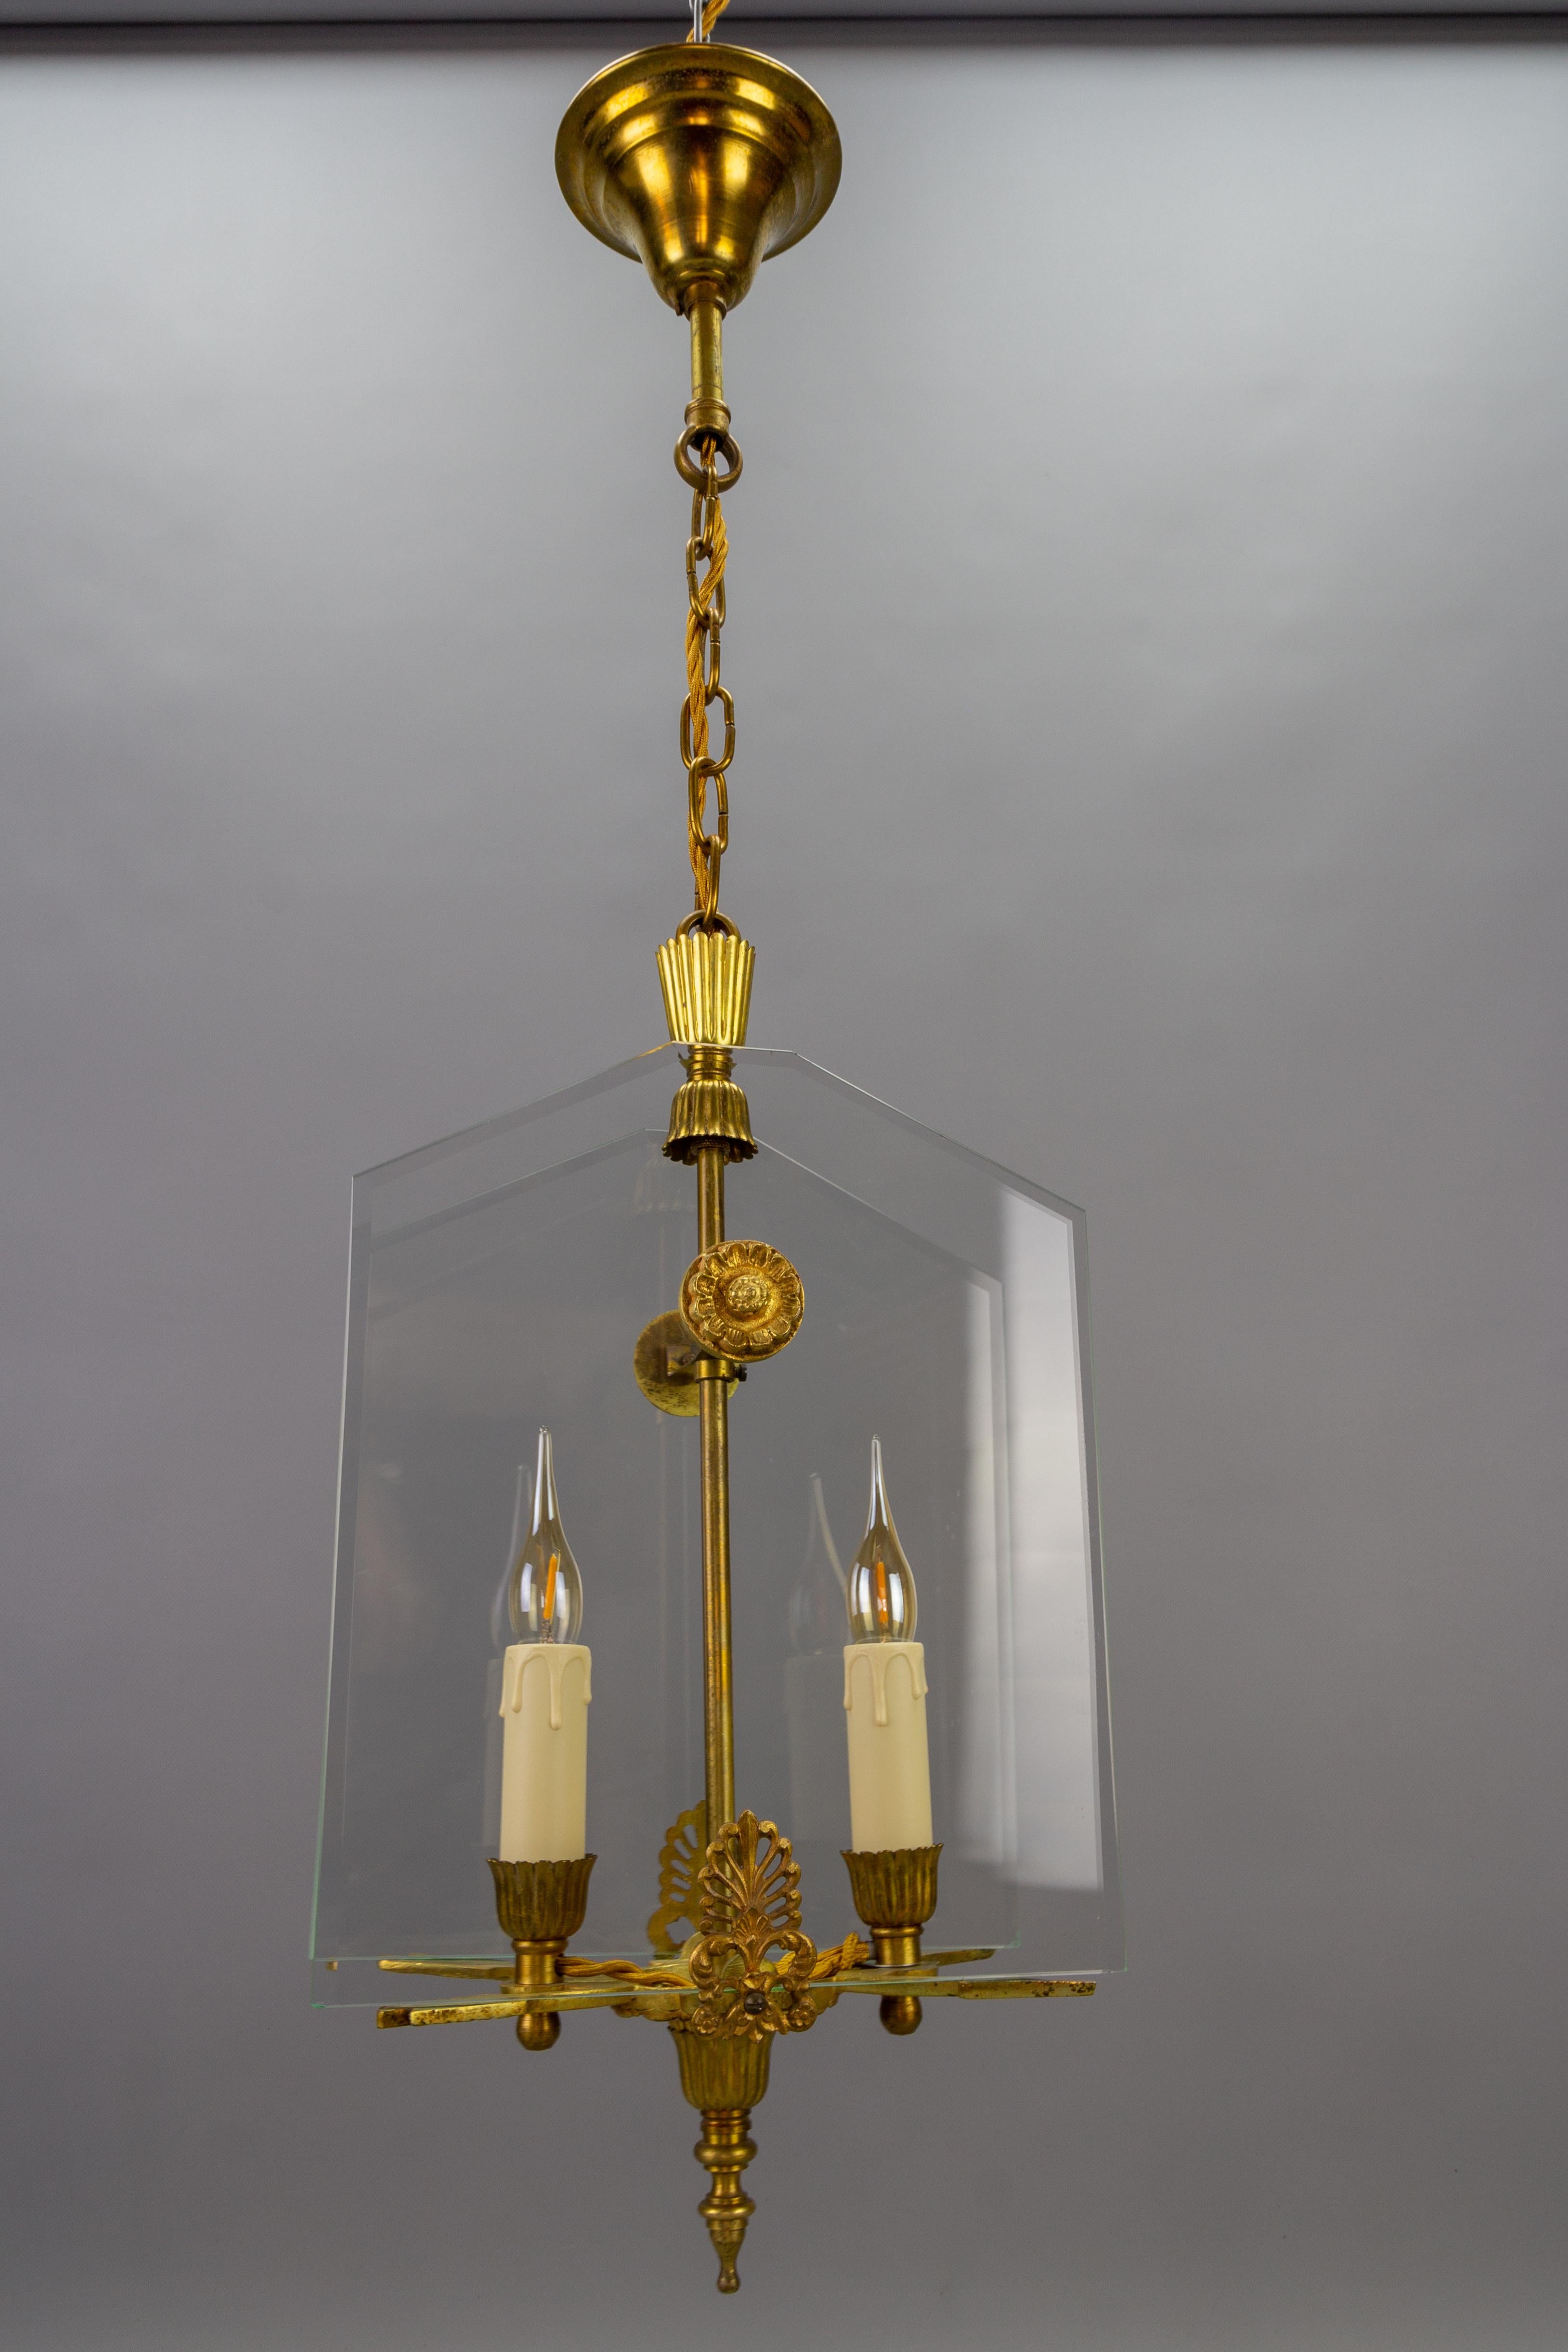 French Empire-style glass and bronze two-light Pendant Chandelier, circa the 1950s.
This absolutely adorable Empire-style chandelier features a bronze frame with two arrows and two beveled glass panels. 
Two sockets for E14 size light